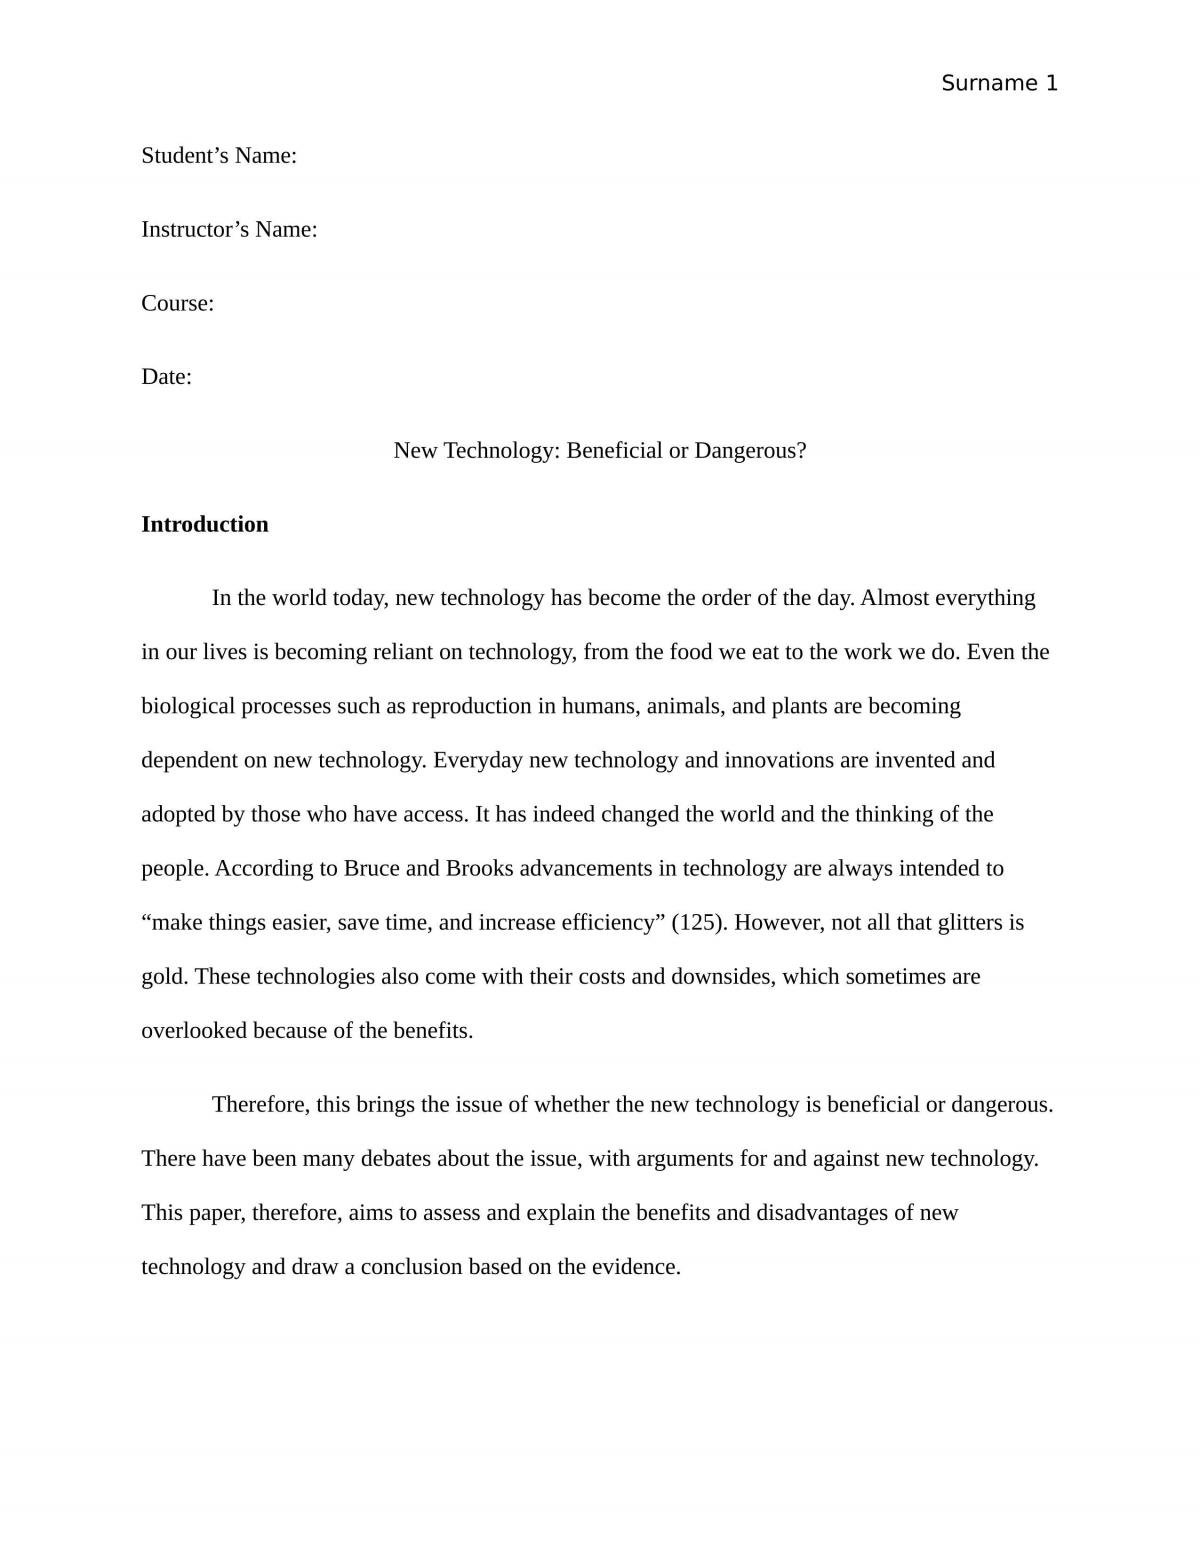 persuasive essay on reflection on technology and education